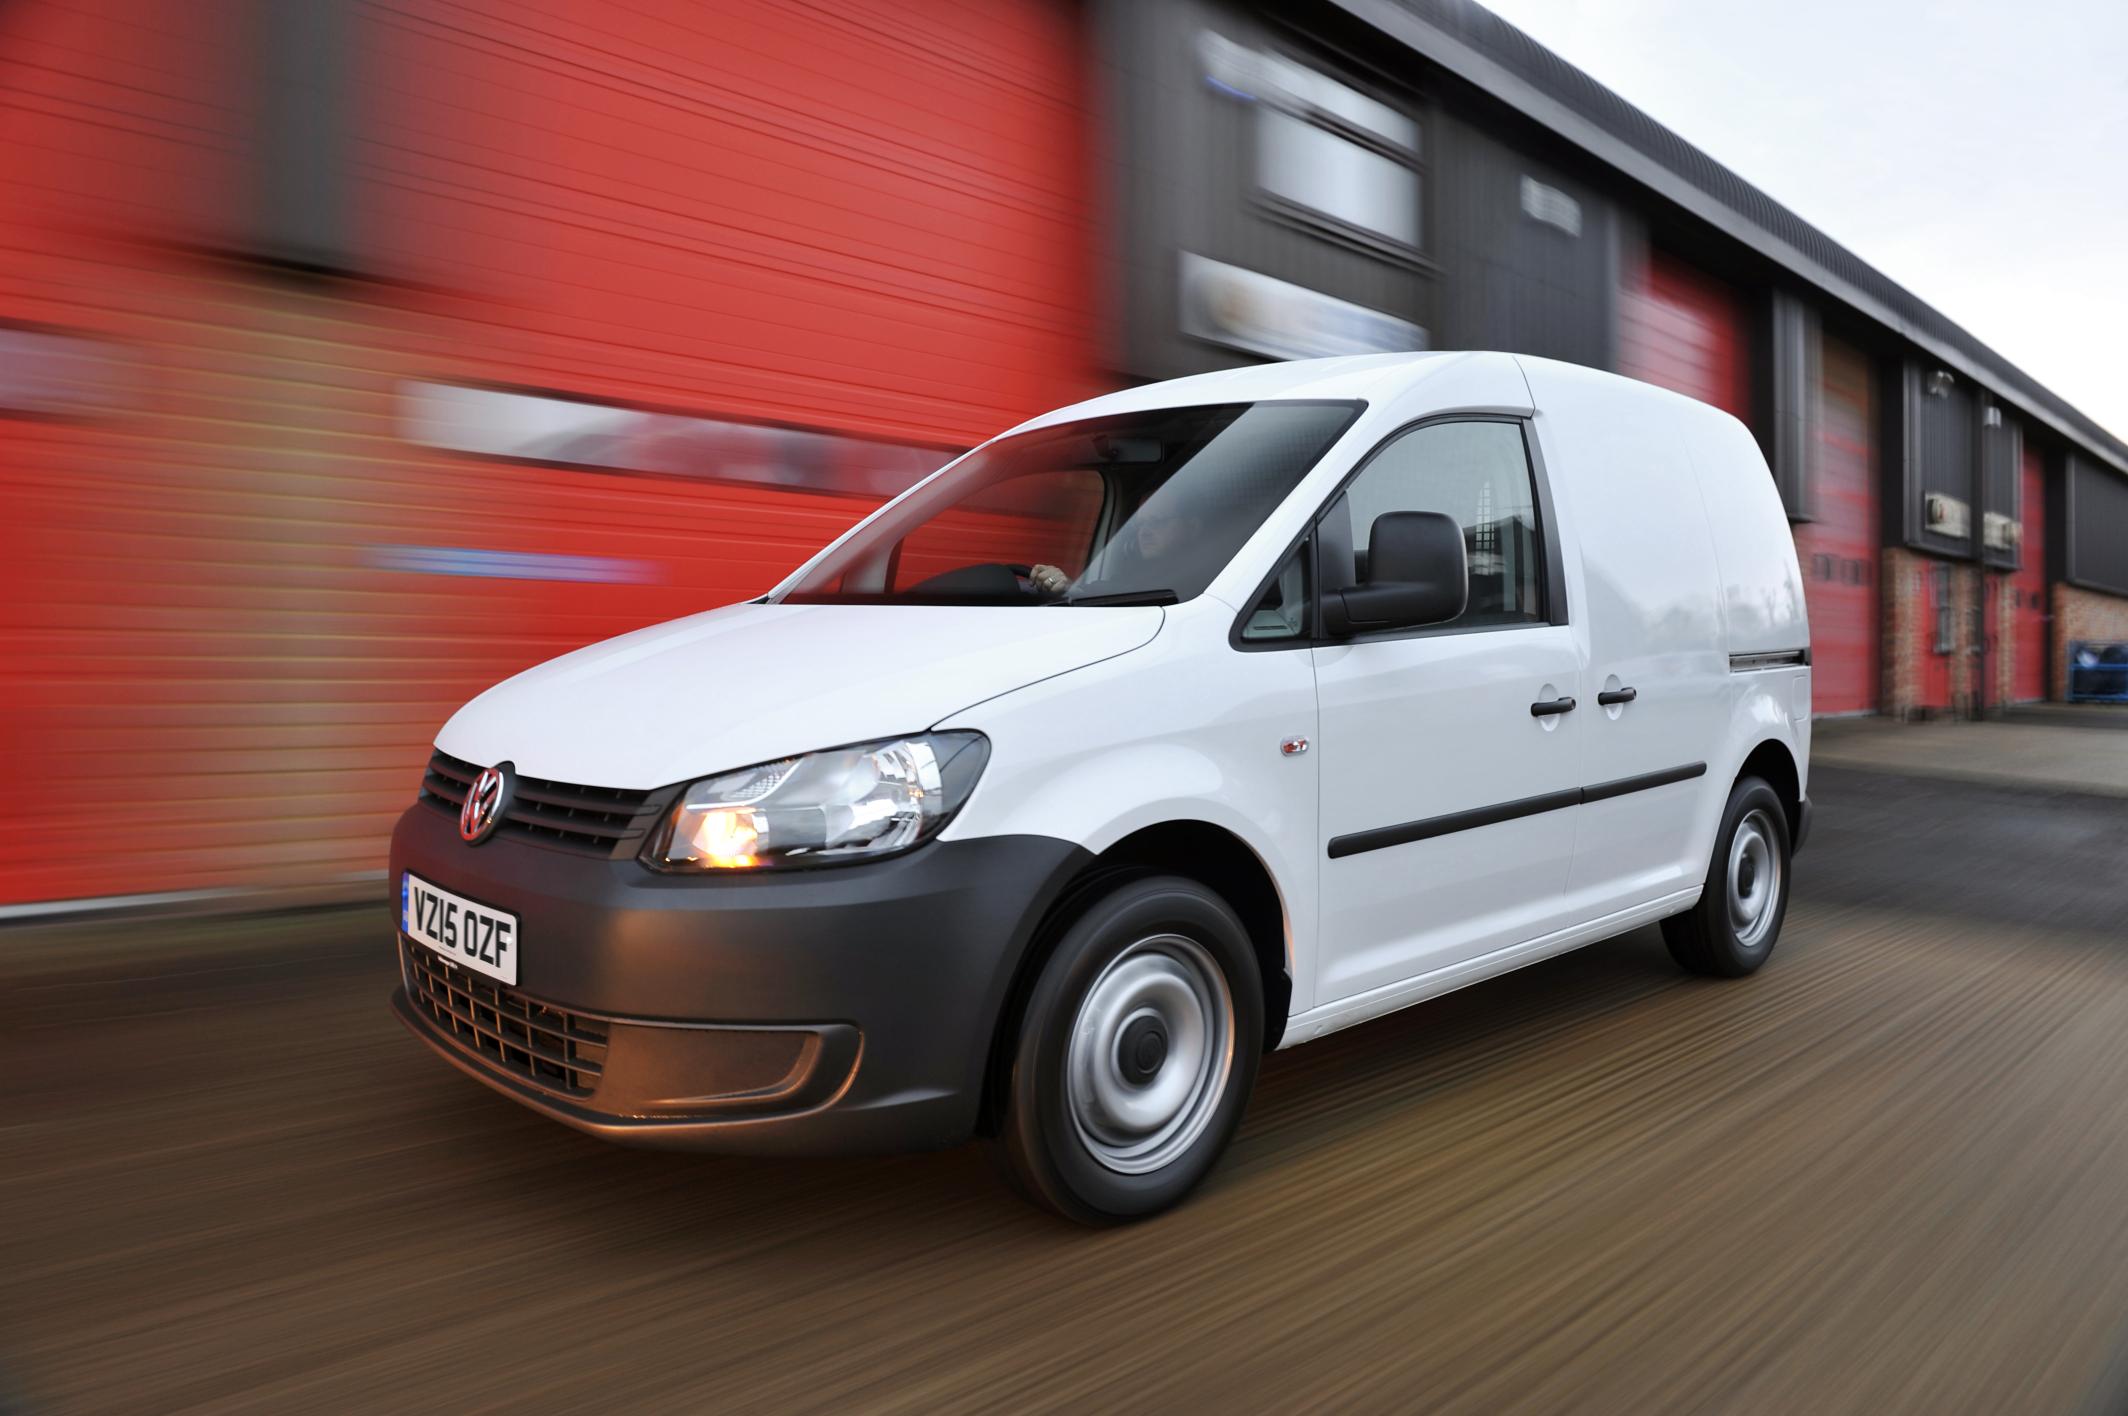 VW Caddy is the choice for Applebridge Construction